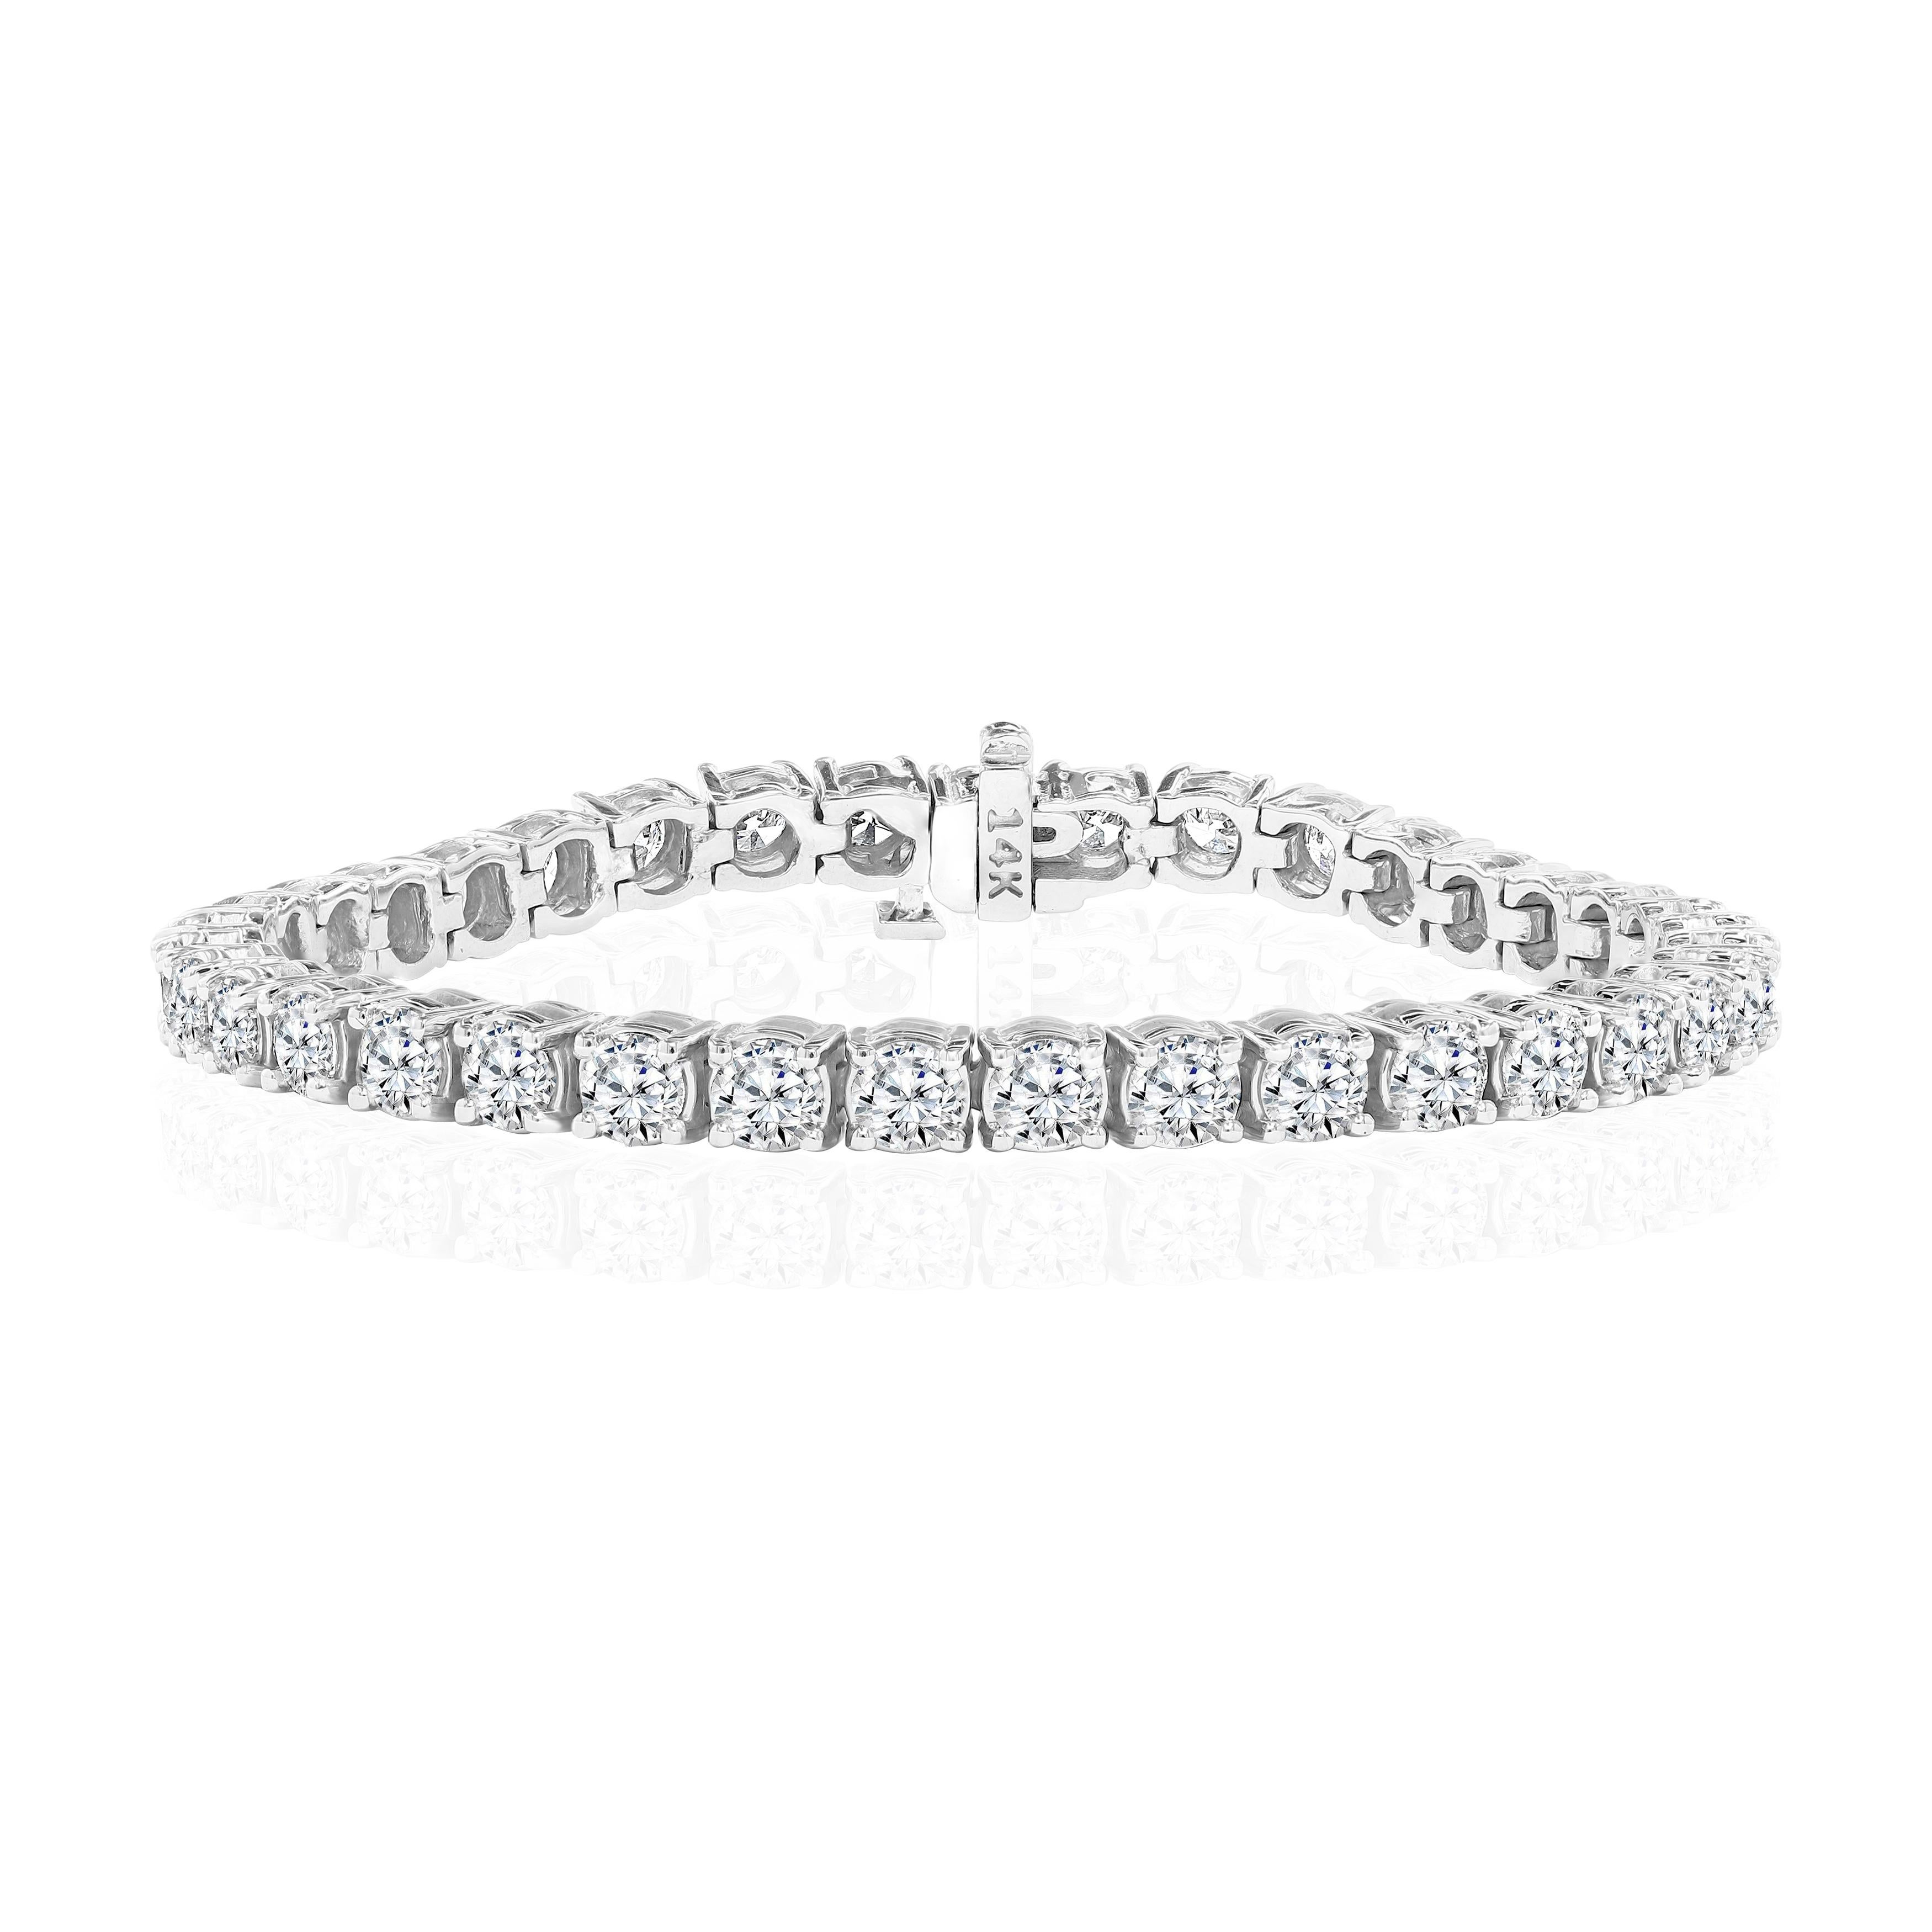 32 Round Brilliant Diamonds weighing 15.01 Carats and set in 14 Karat White Gold.

Diamonds are of H-I color and VS-SI clarity.

Measures 6.75 inches.